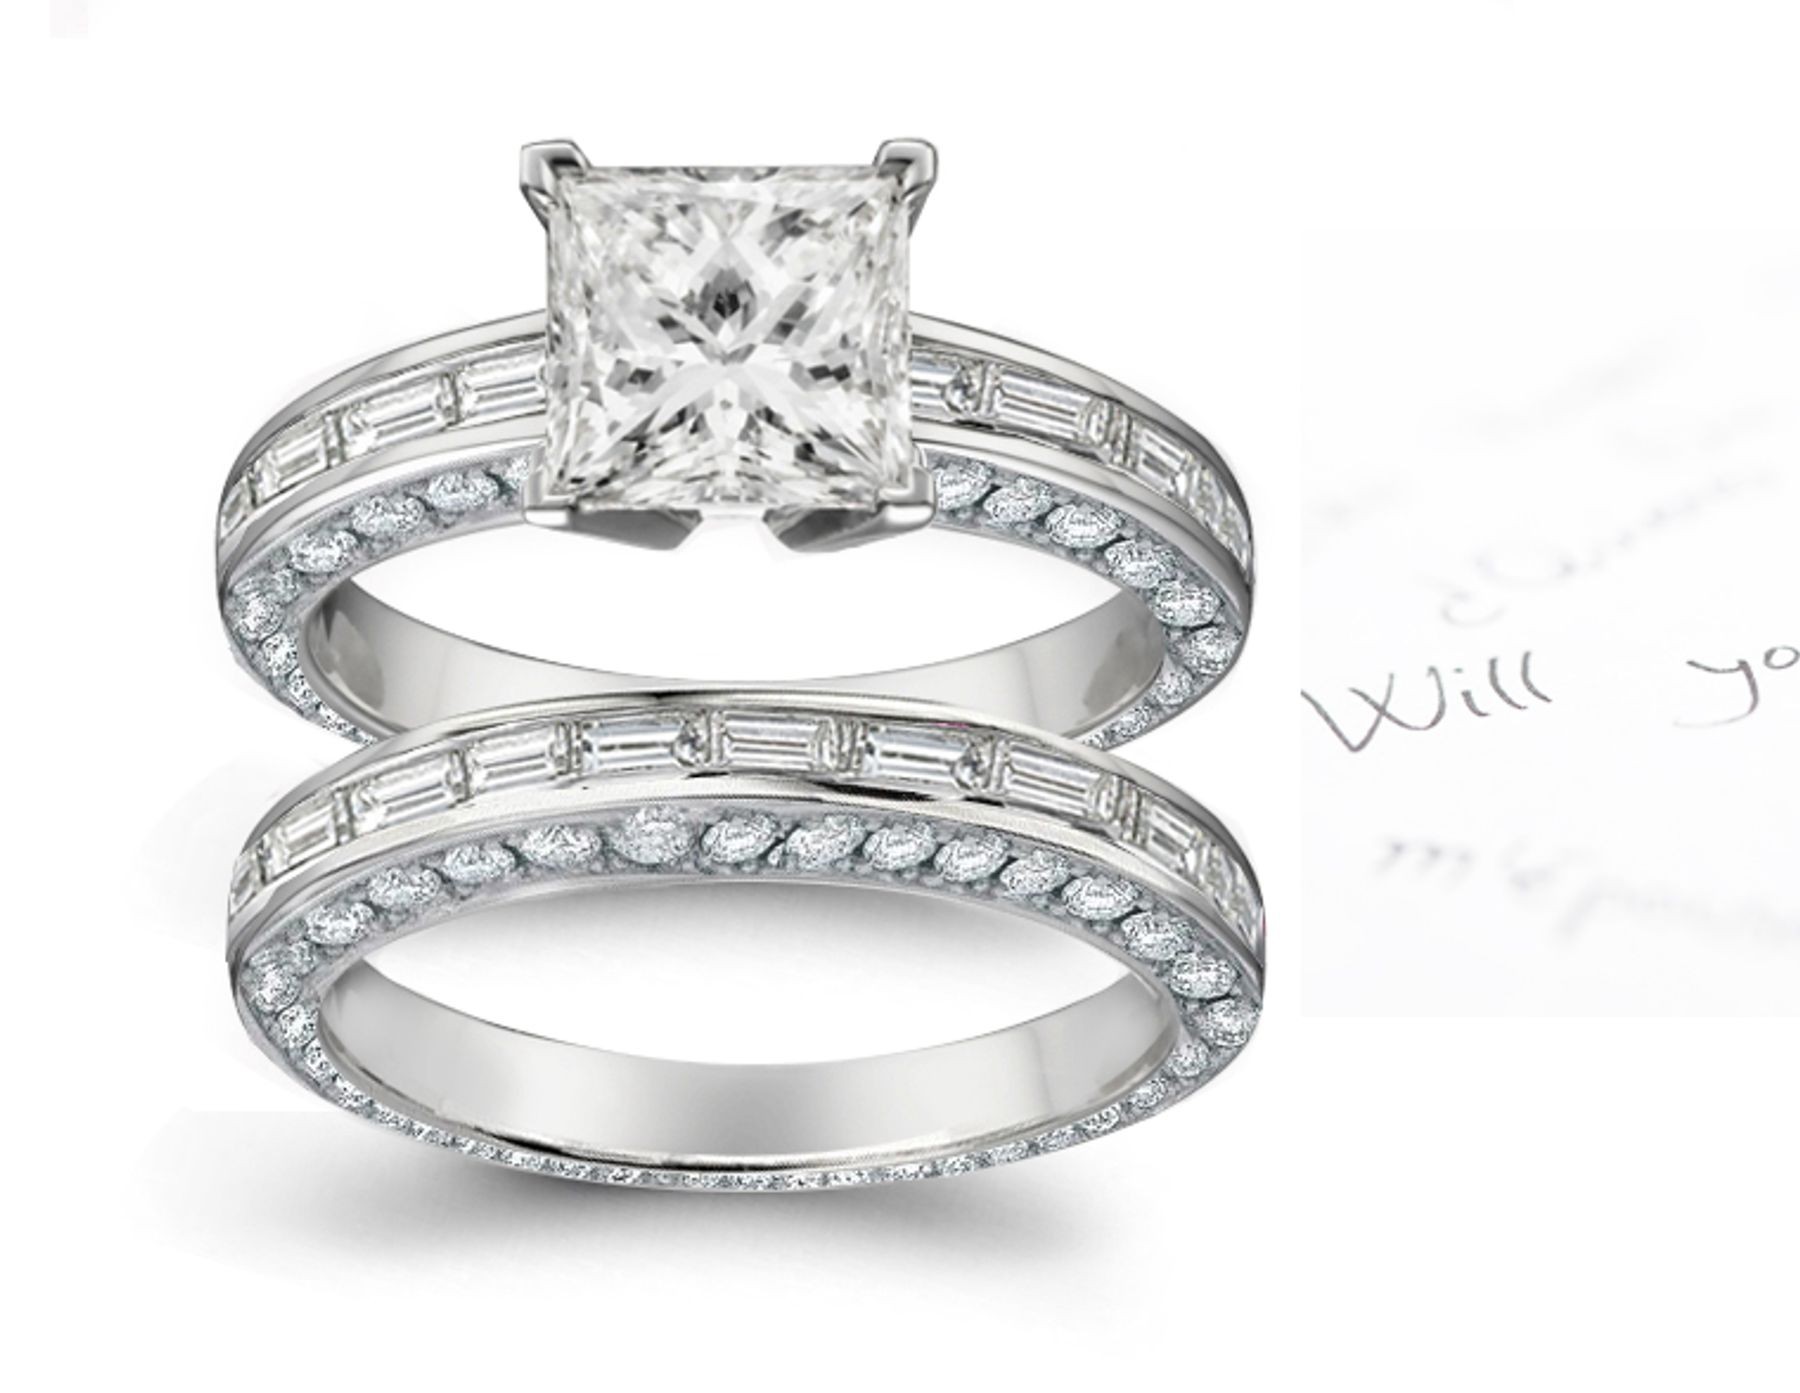 Diamond Engagement and Wedding Halo Diamond Ring & Band in Platinum and Gold